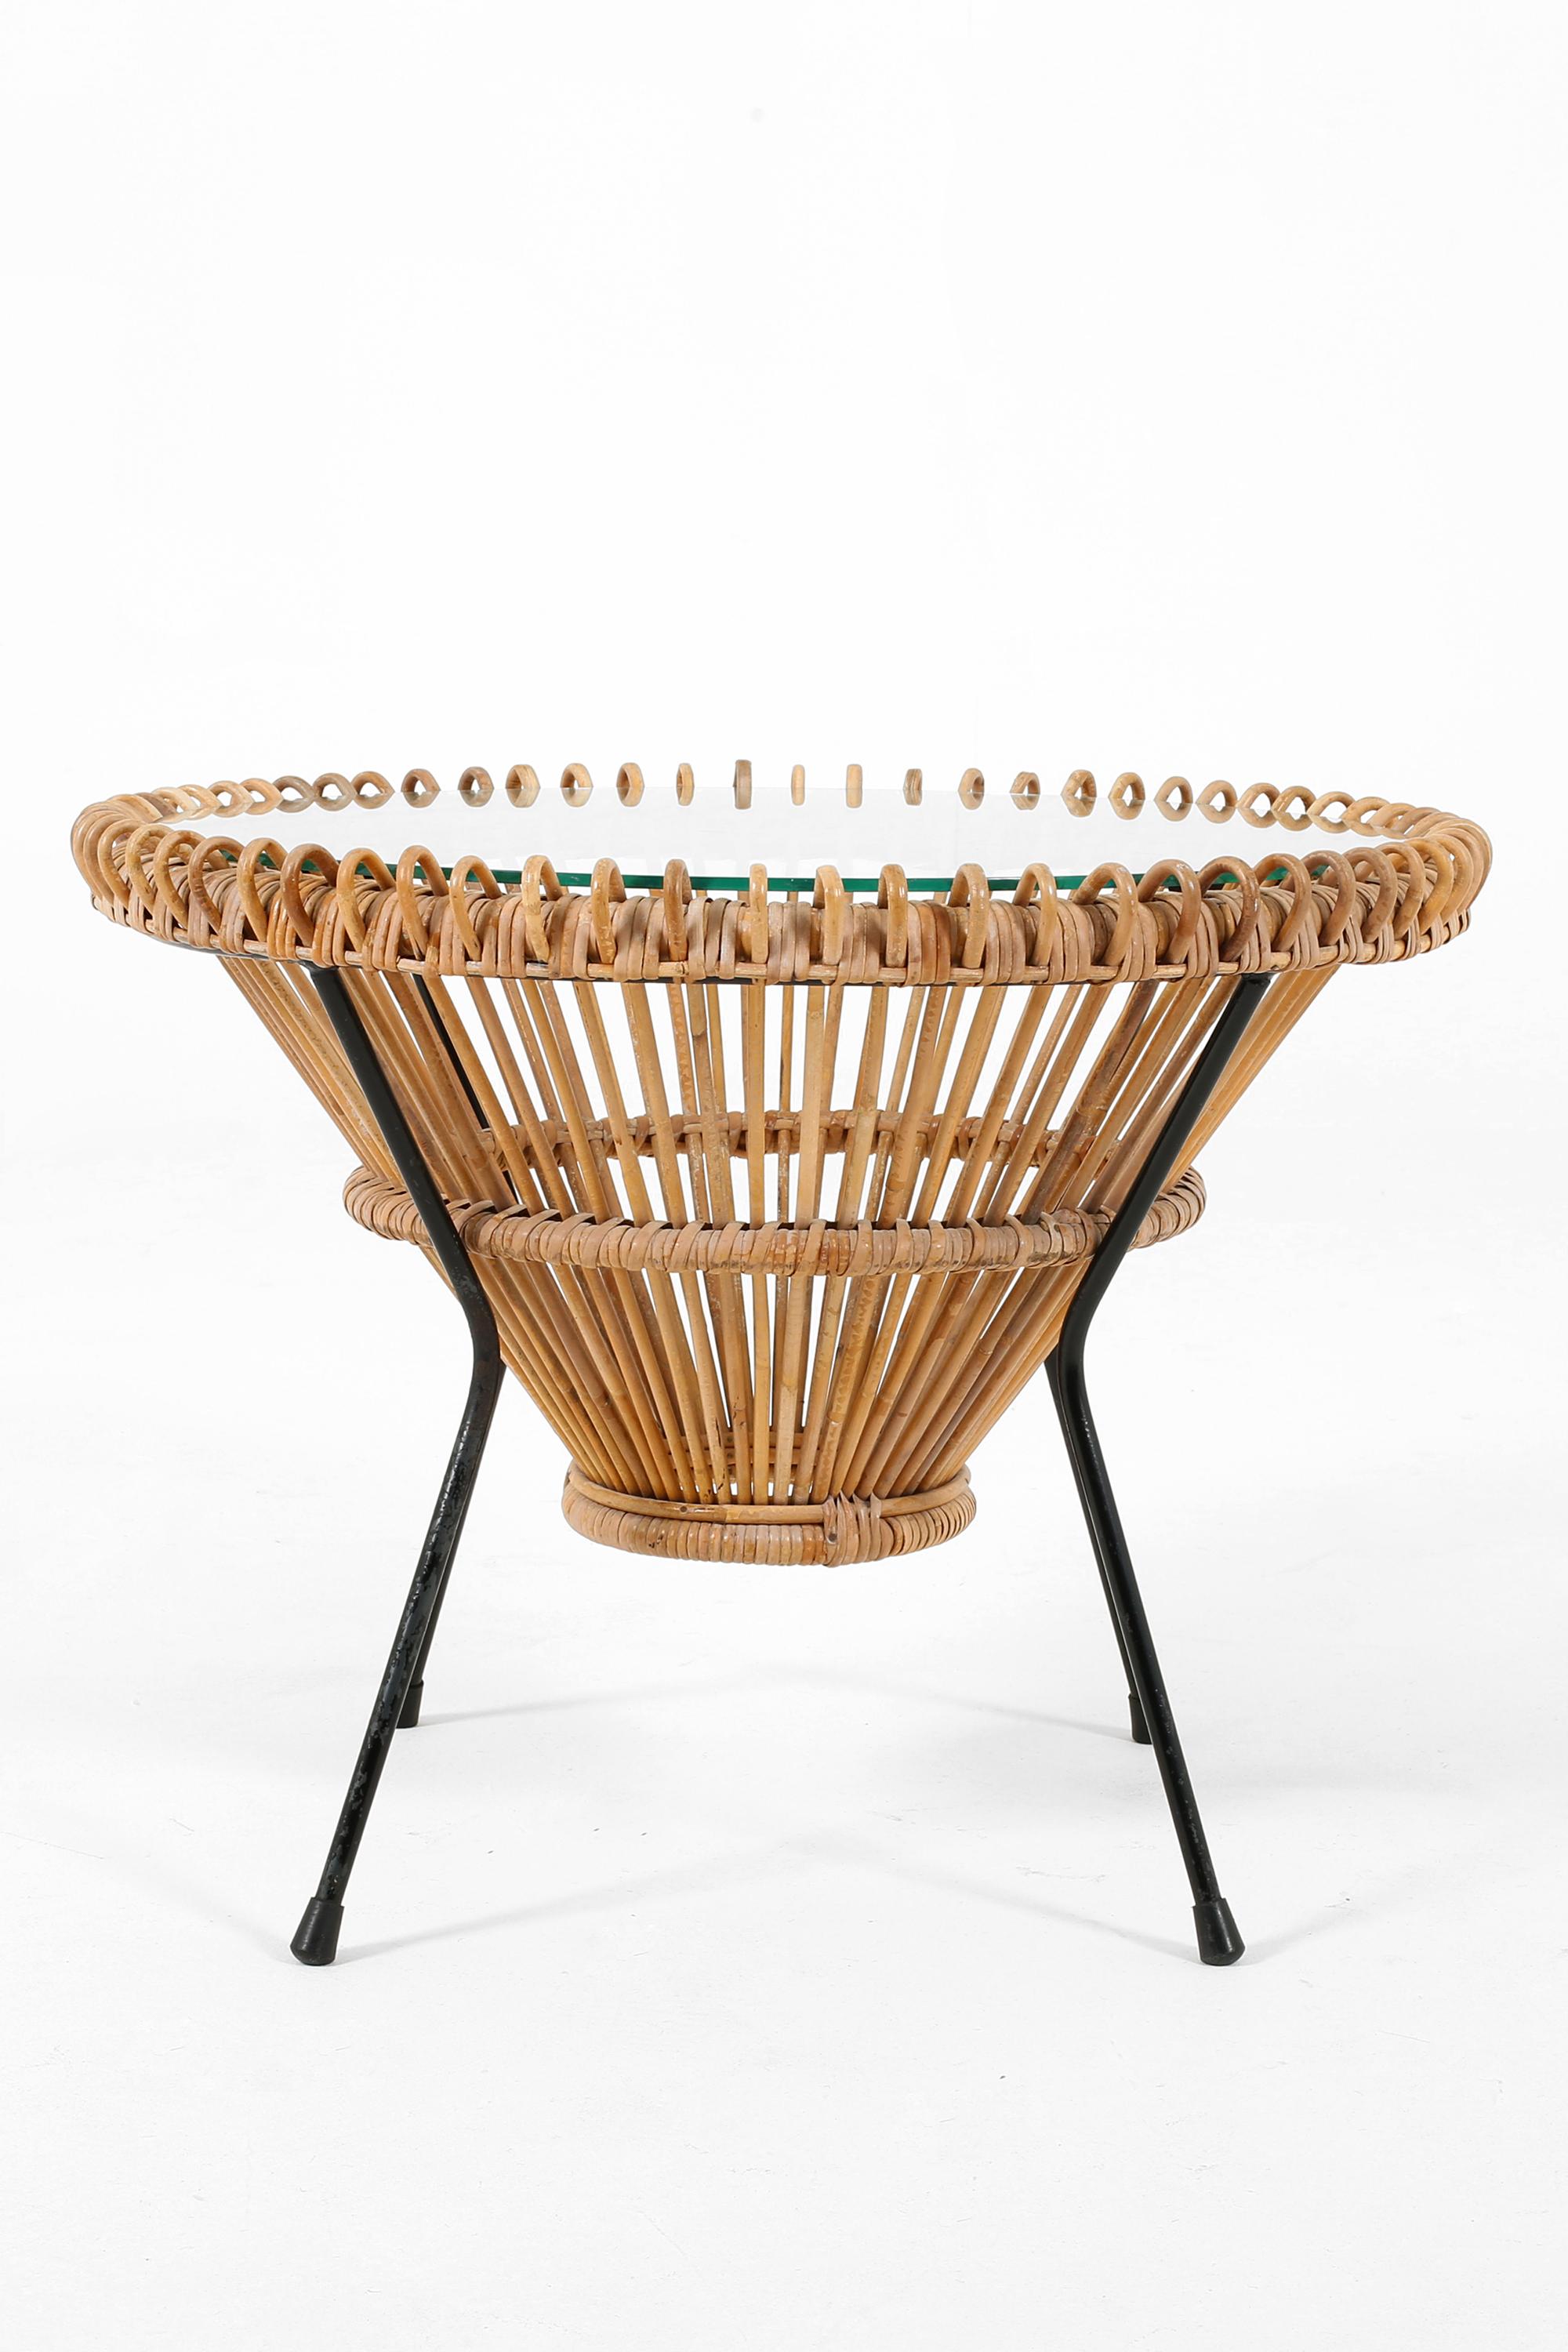 A rattan, glass and black enamelled steel circular occasional table by Franco Albini. Italian, c. 1950s.